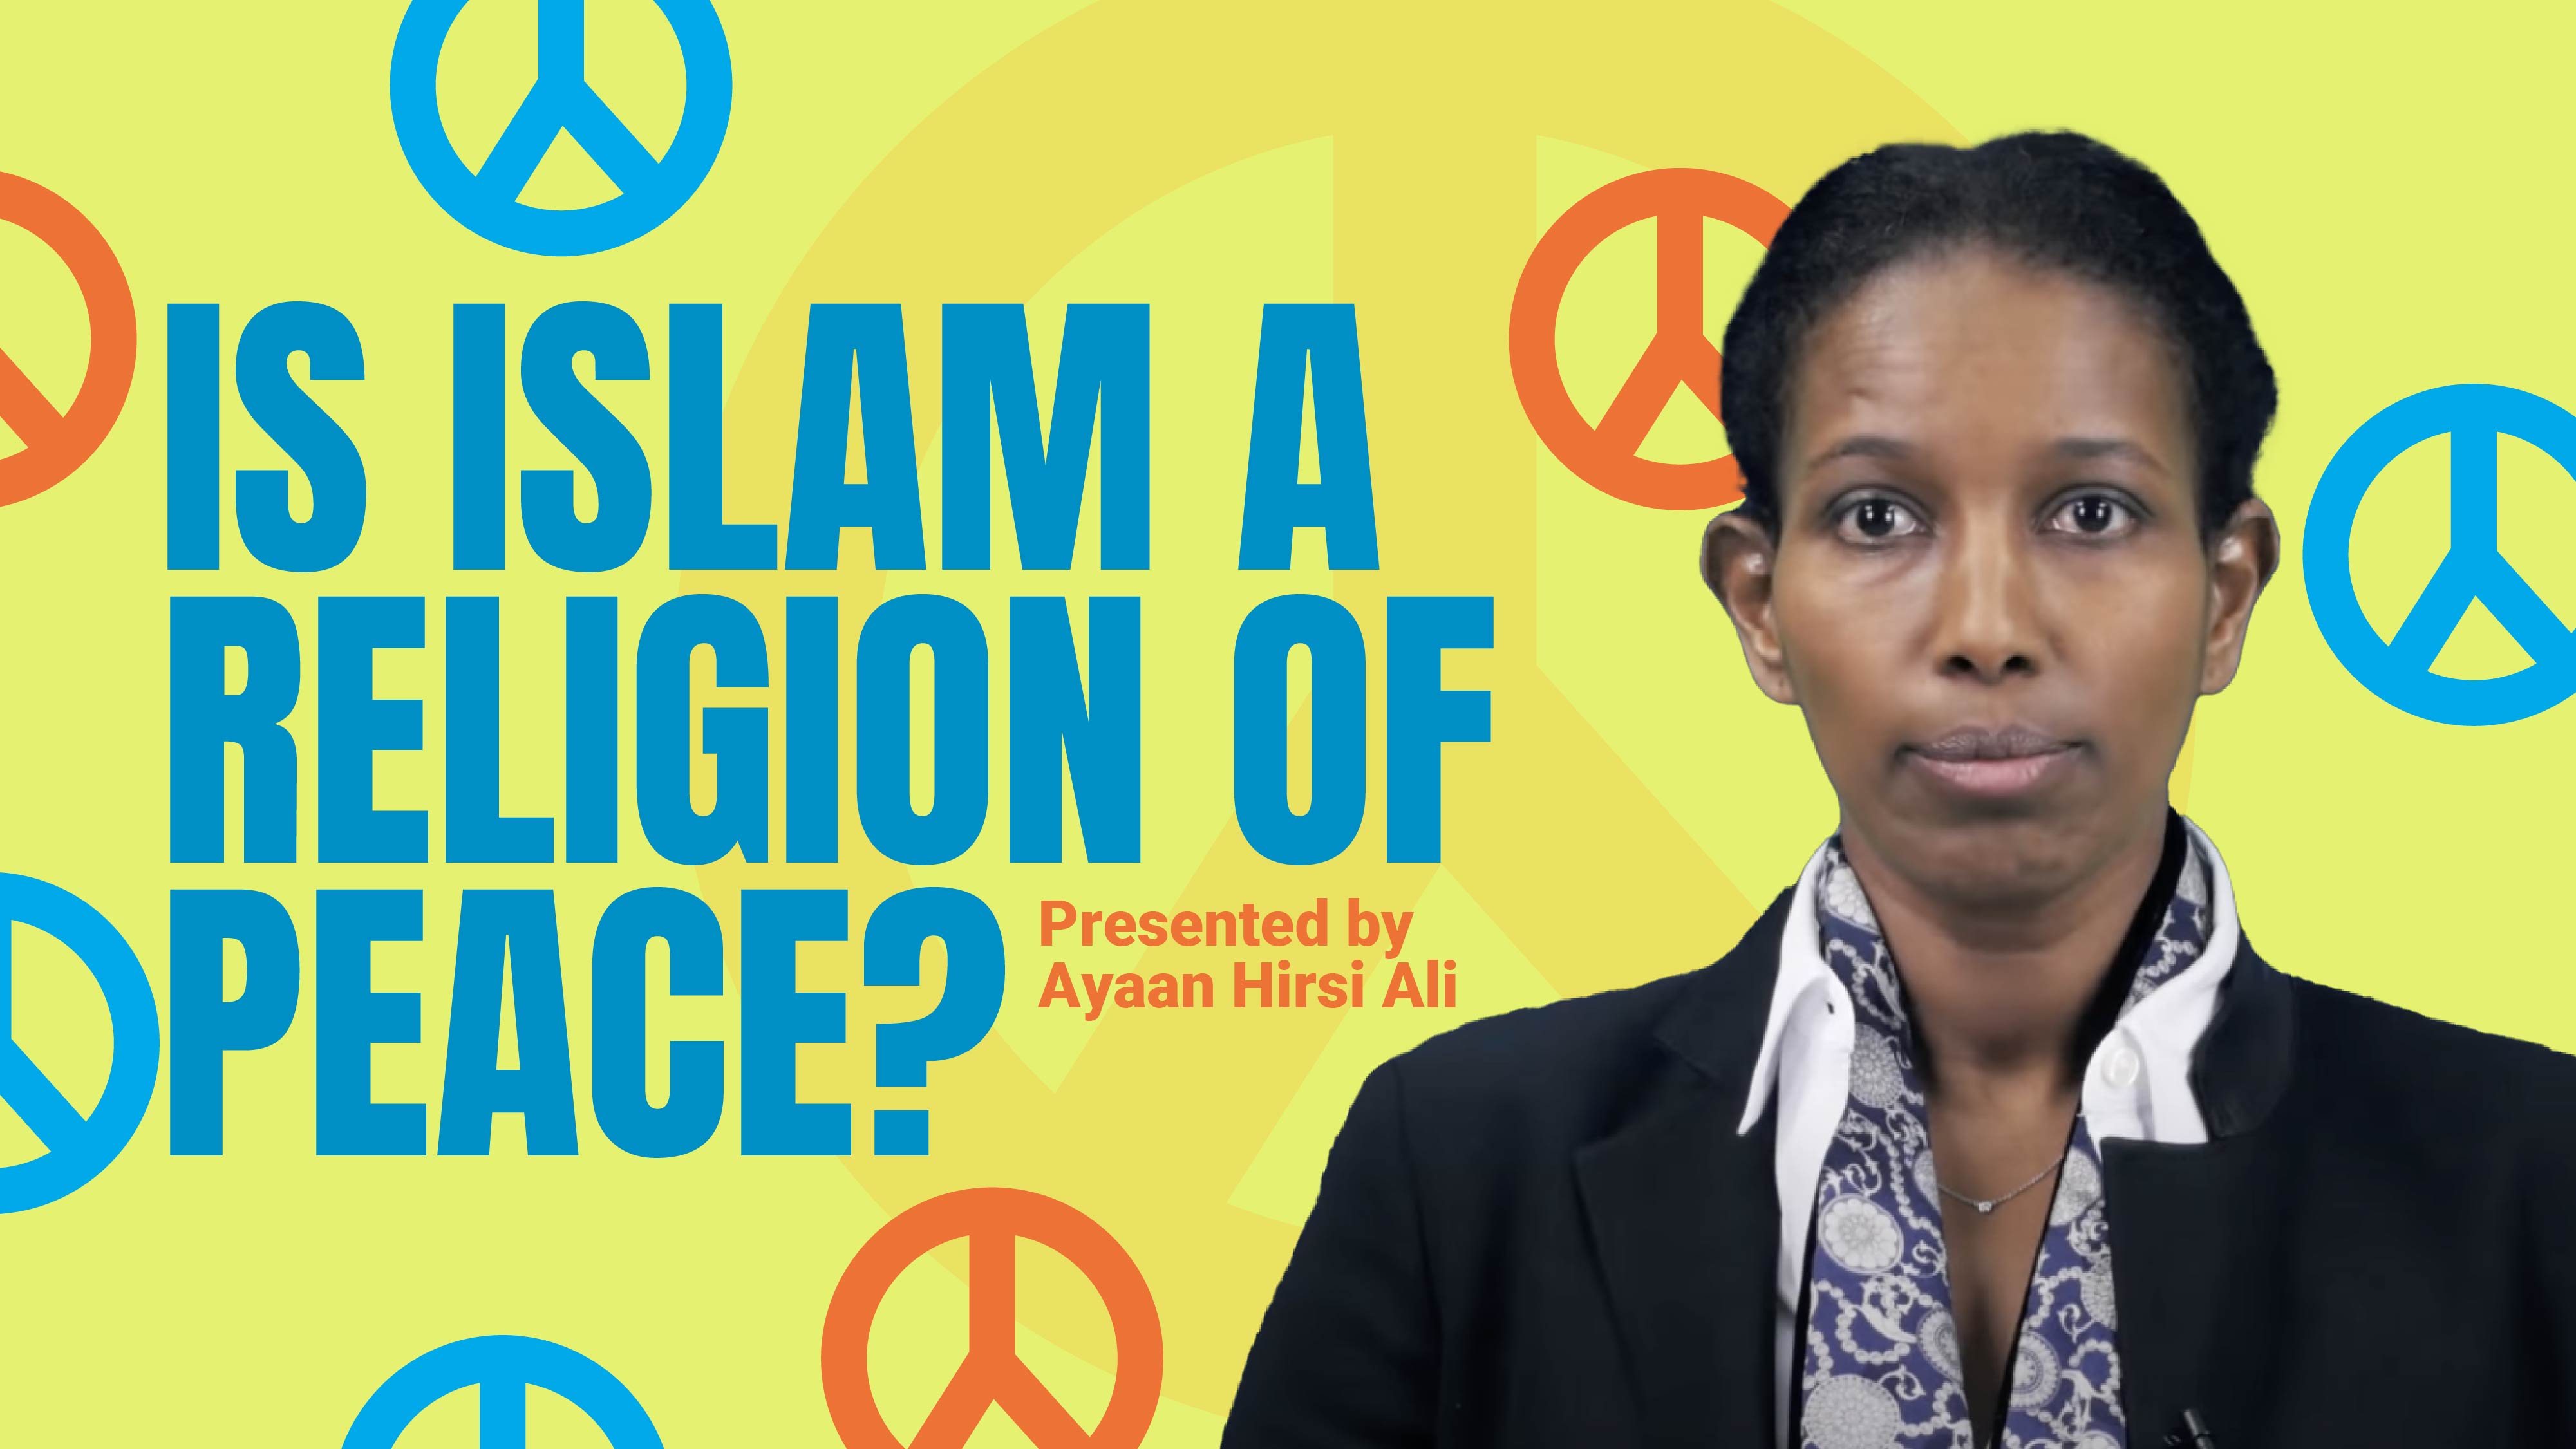 heretic why islam needs a reformation now